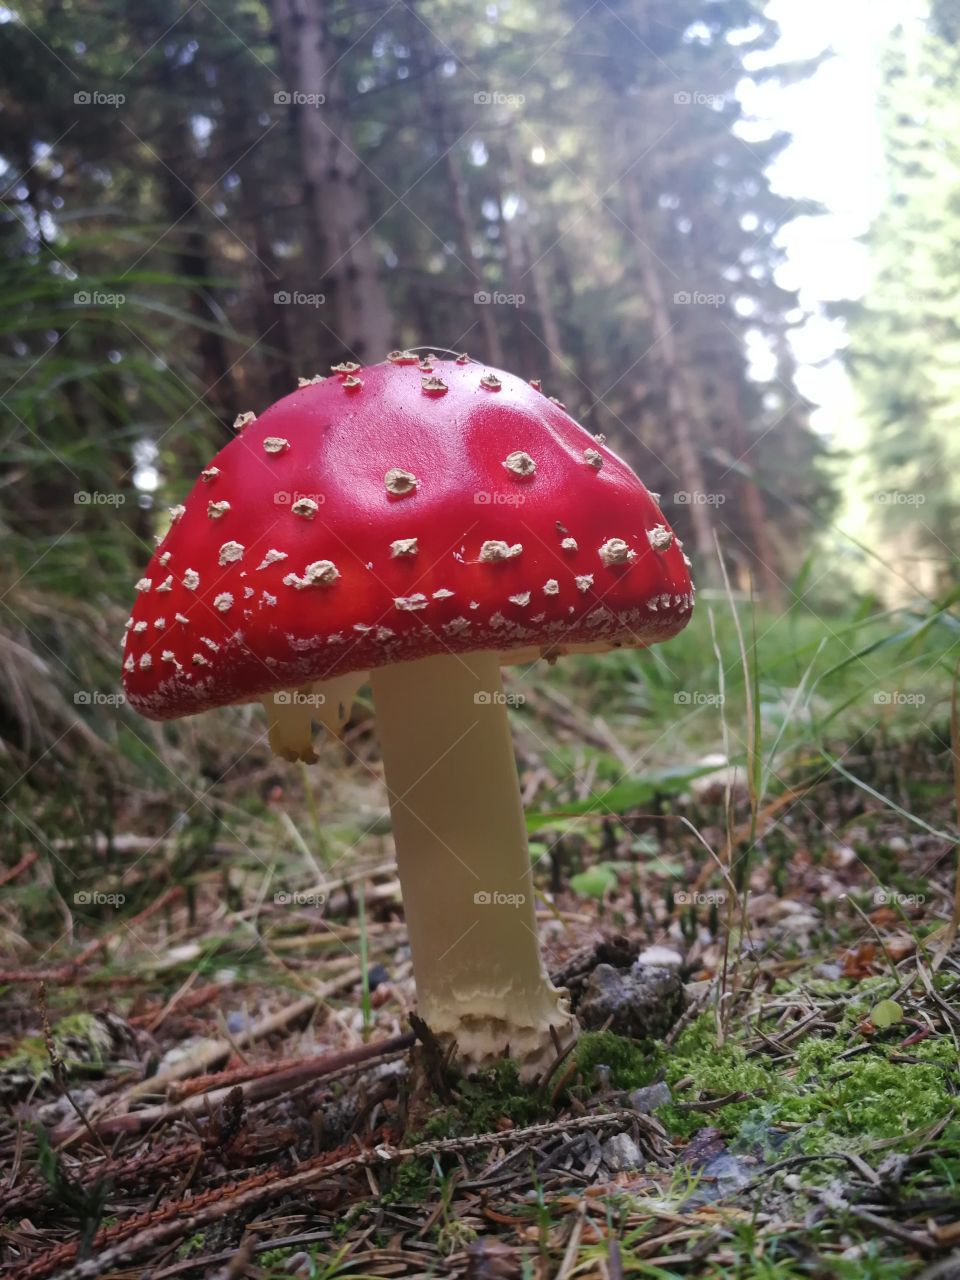 Poisonous toadstool in the mysterious forest